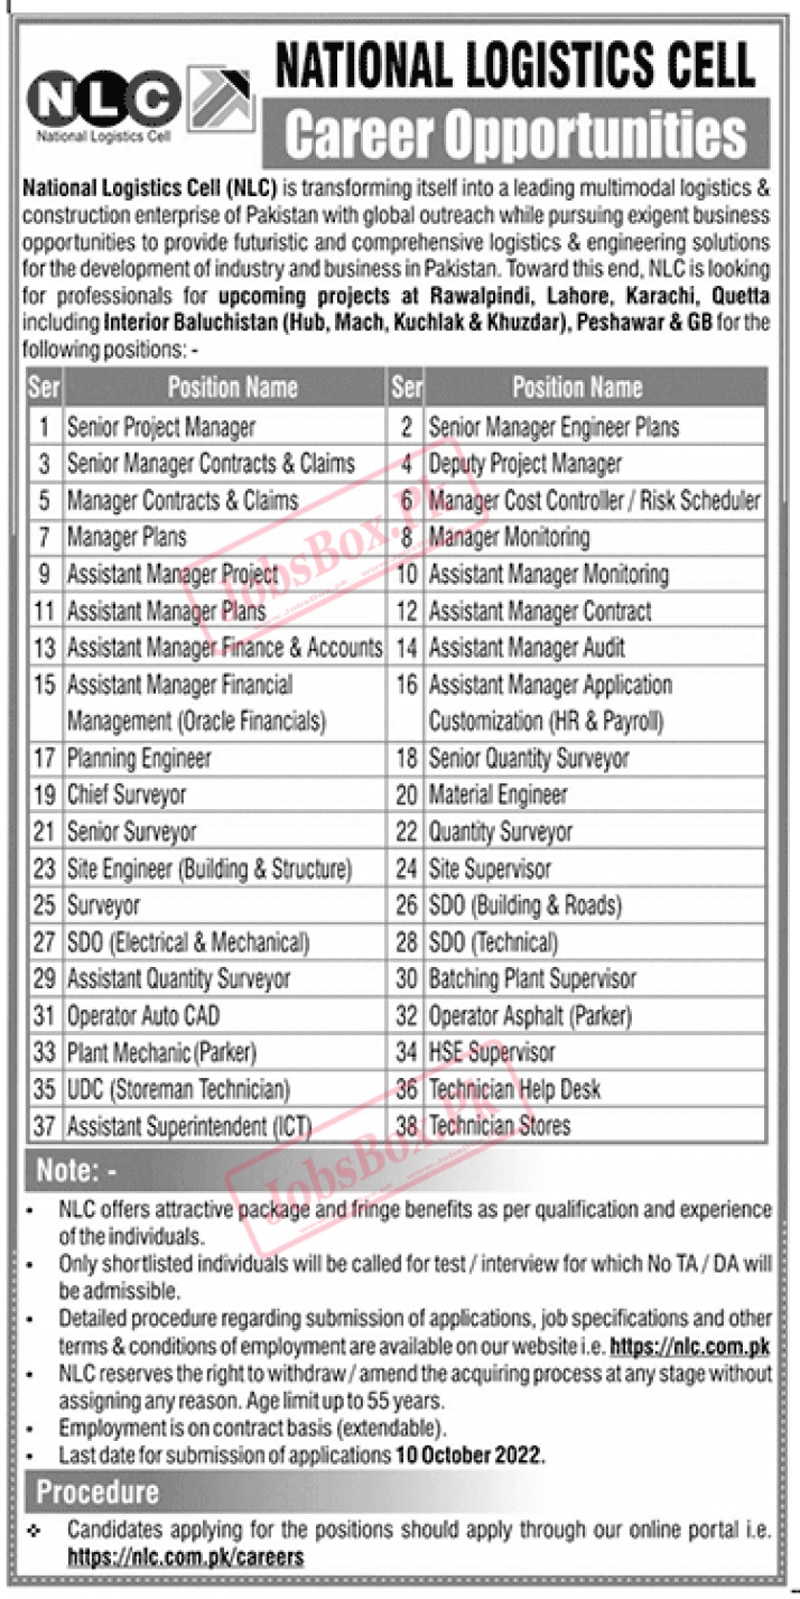 National Logistics Cell - Latest NLC Works latest government jobs in Pakistan